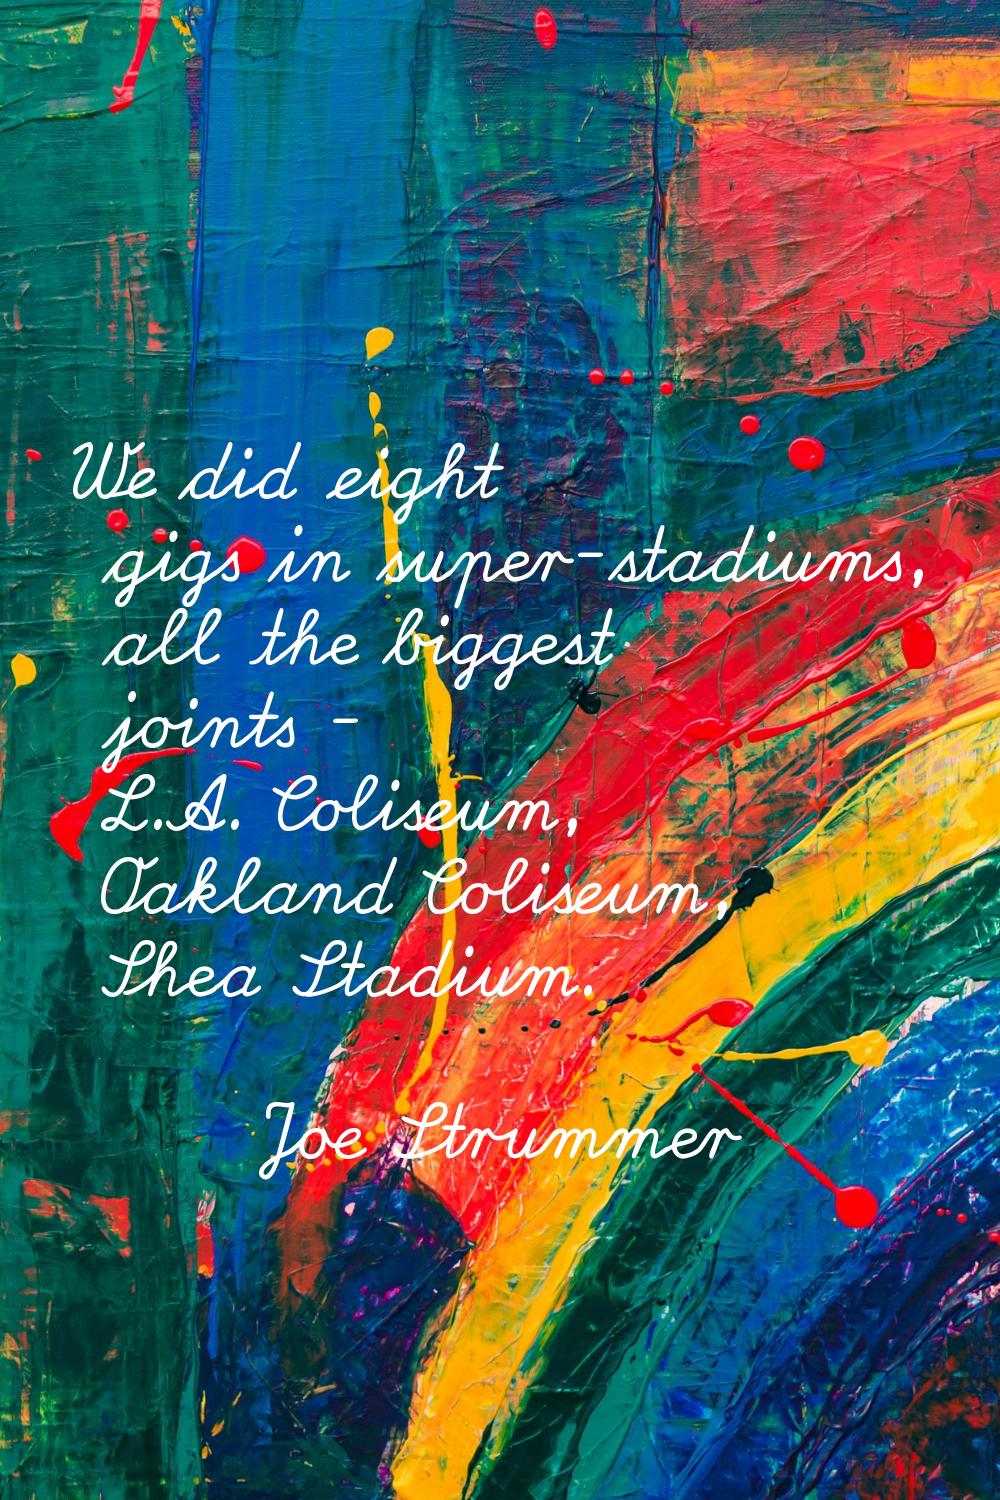 We did eight gigs in super-stadiums, all the biggest joints - L.A. Coliseum, Oakland Coliseum, Shea